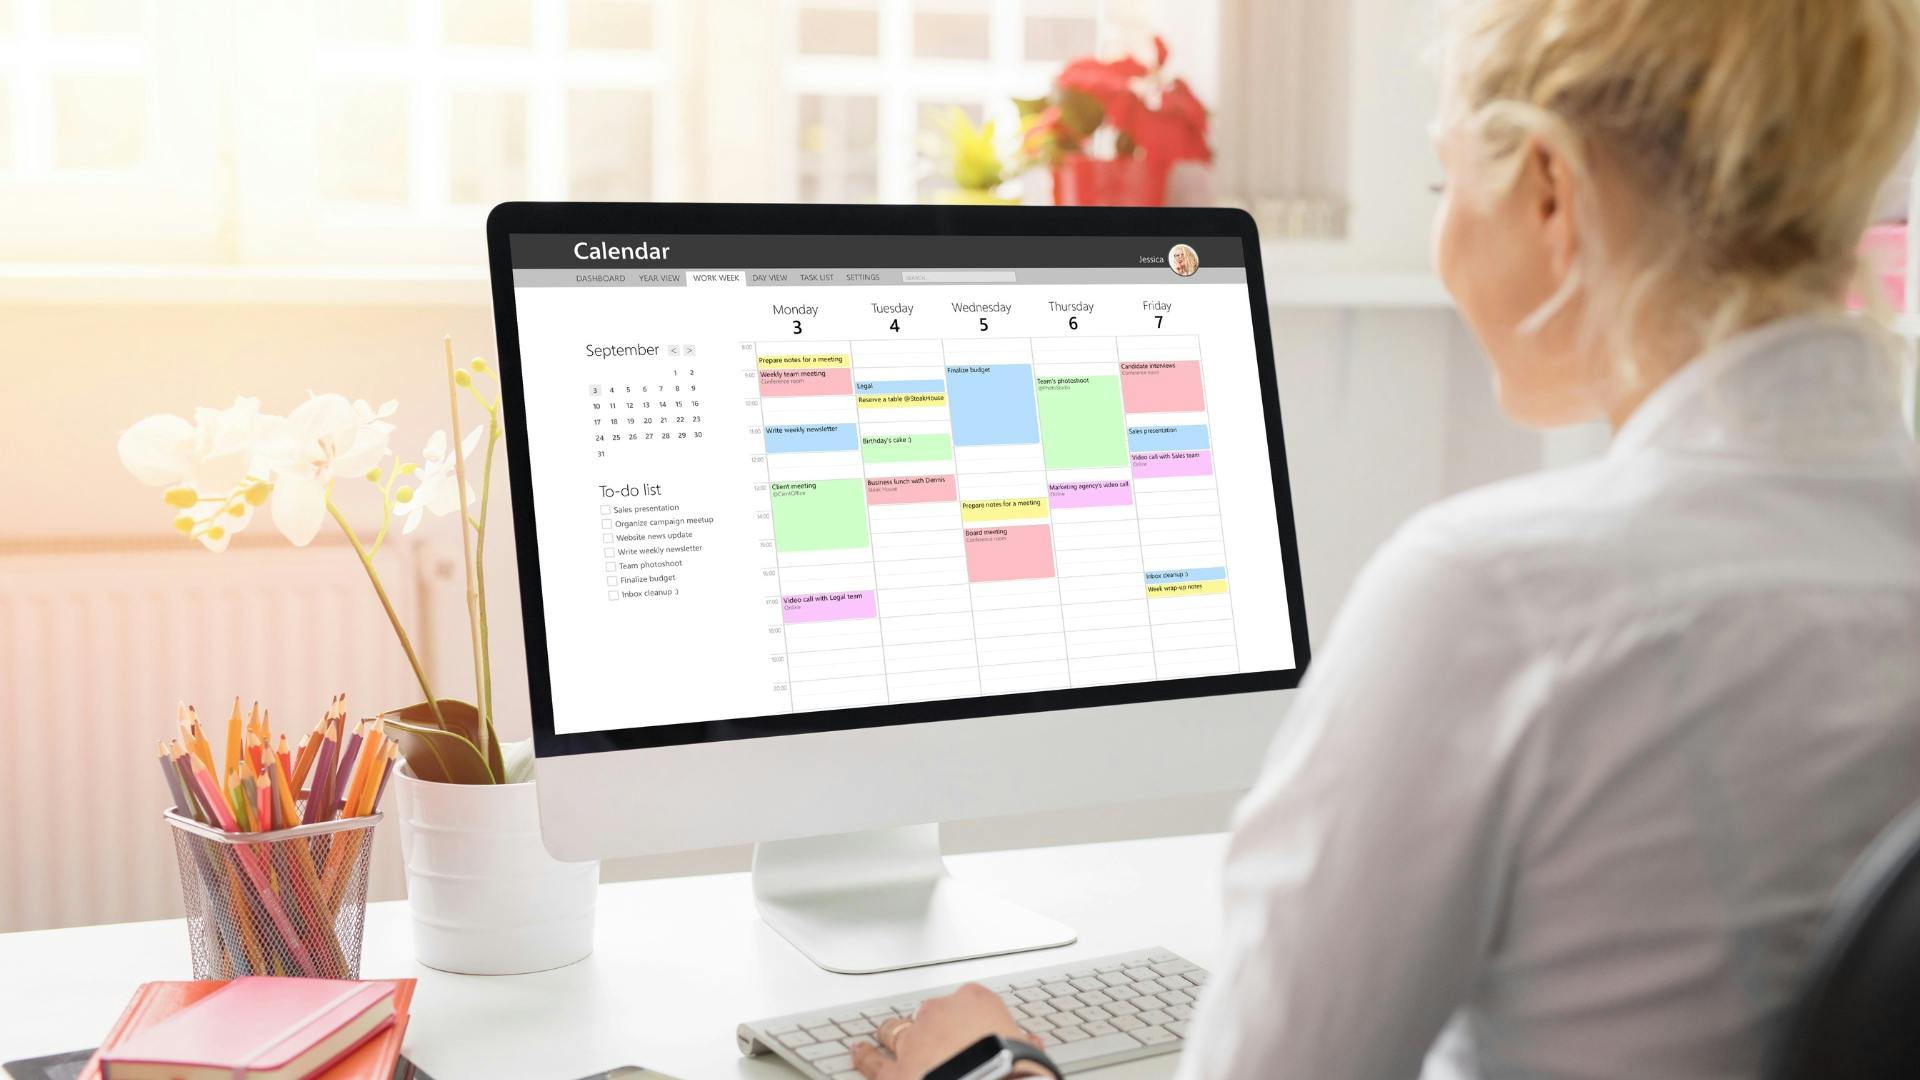 Airbnb cleaner checking availability on digital calendar